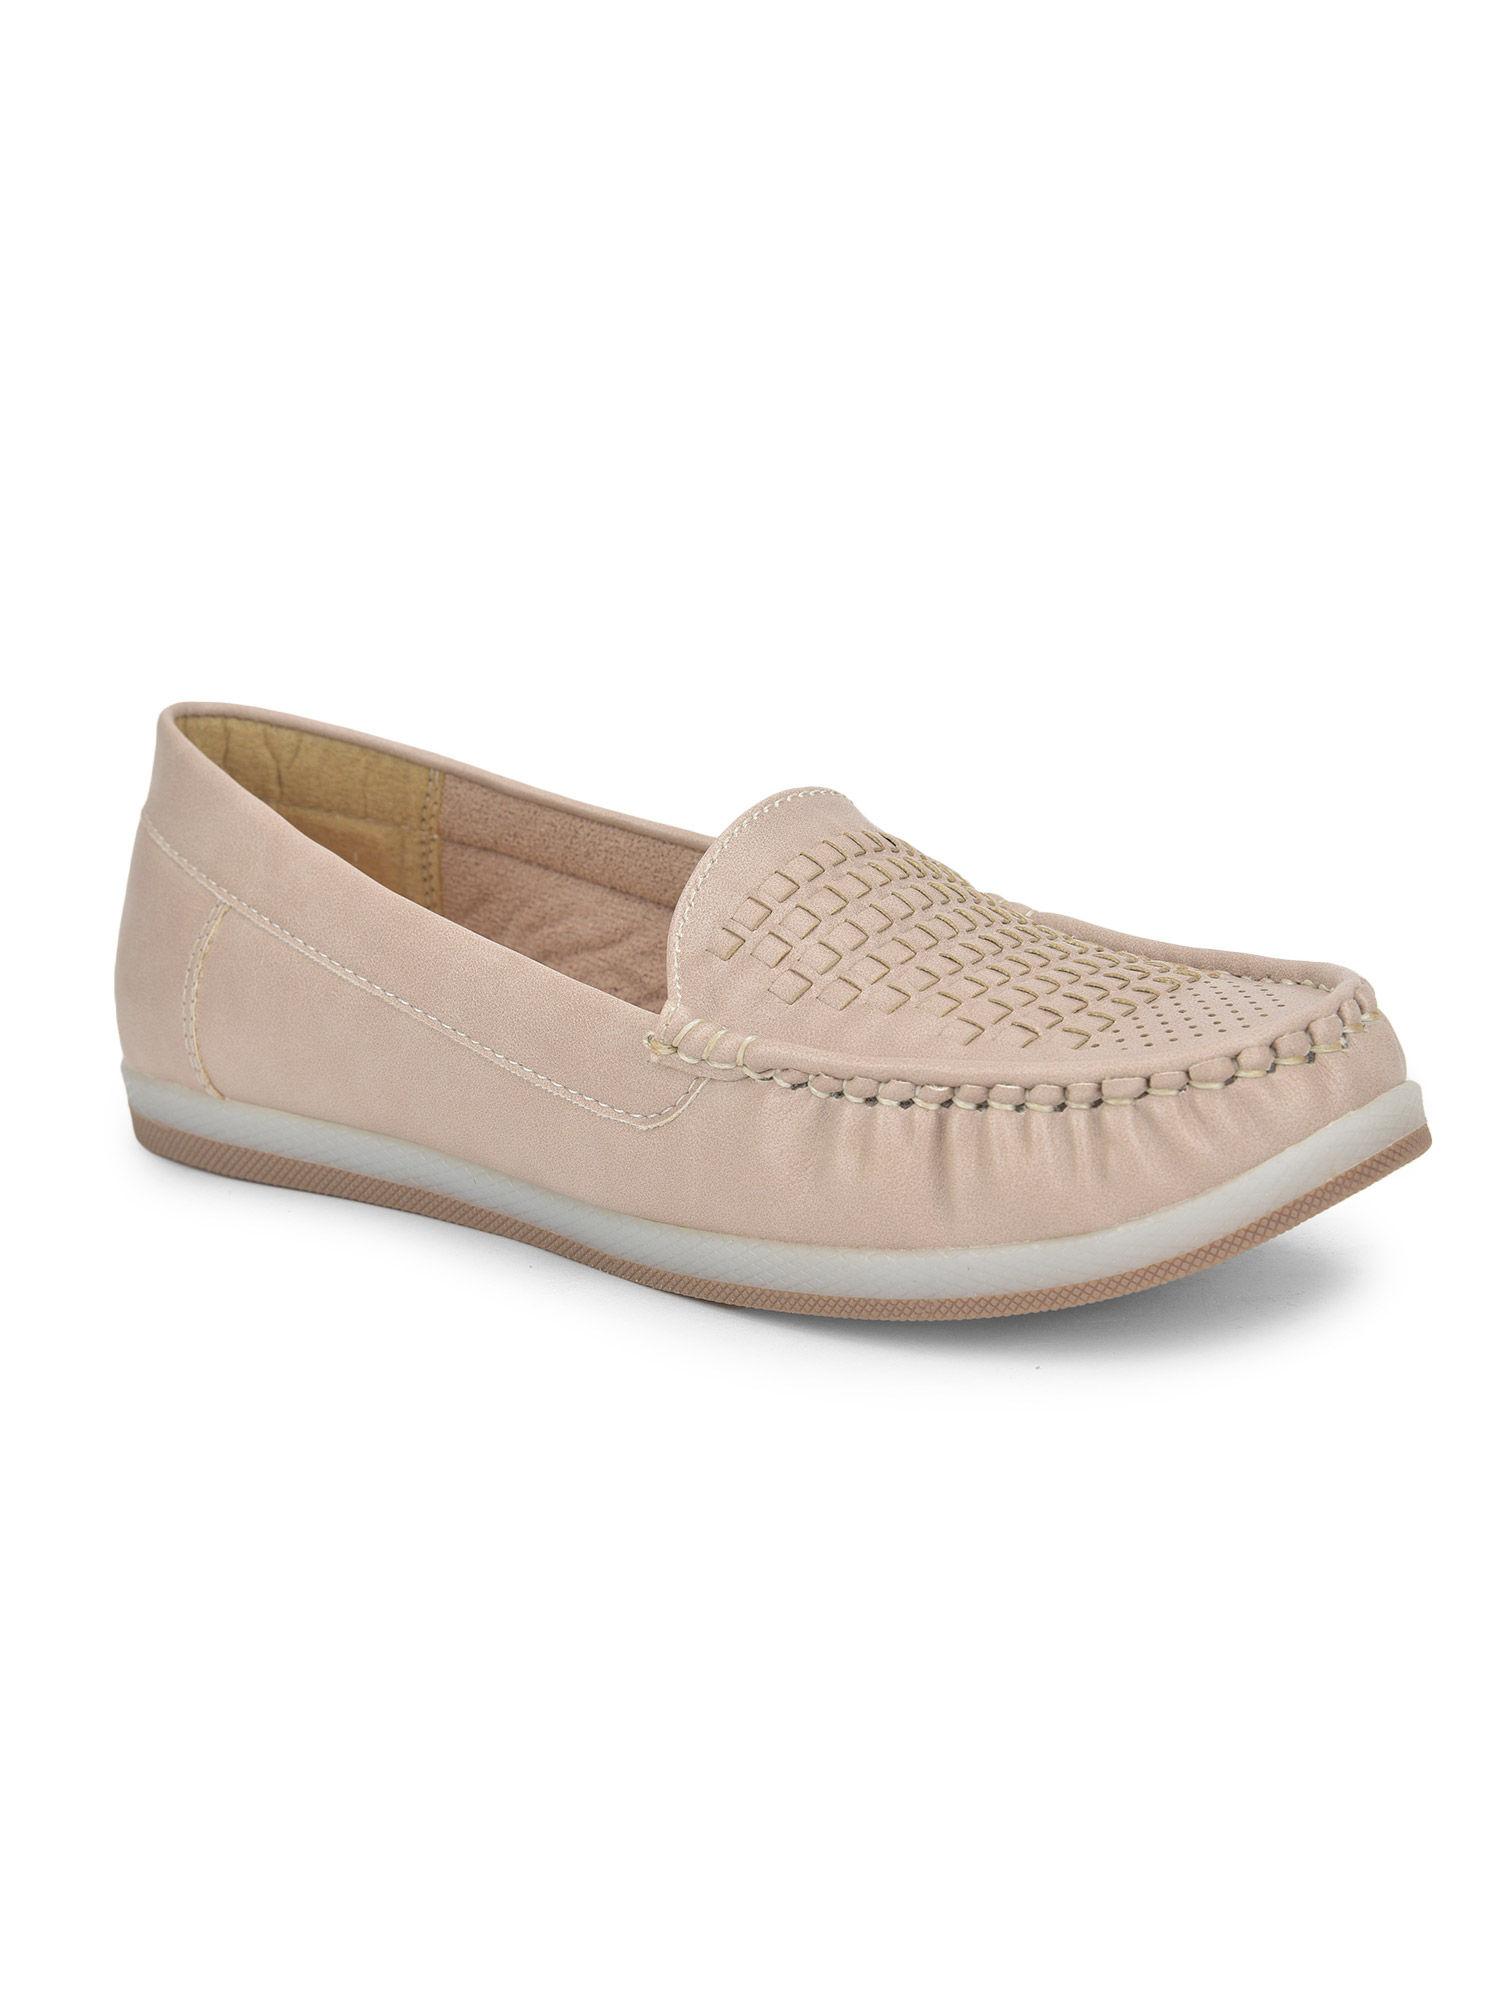 women-cream-solid-loafers